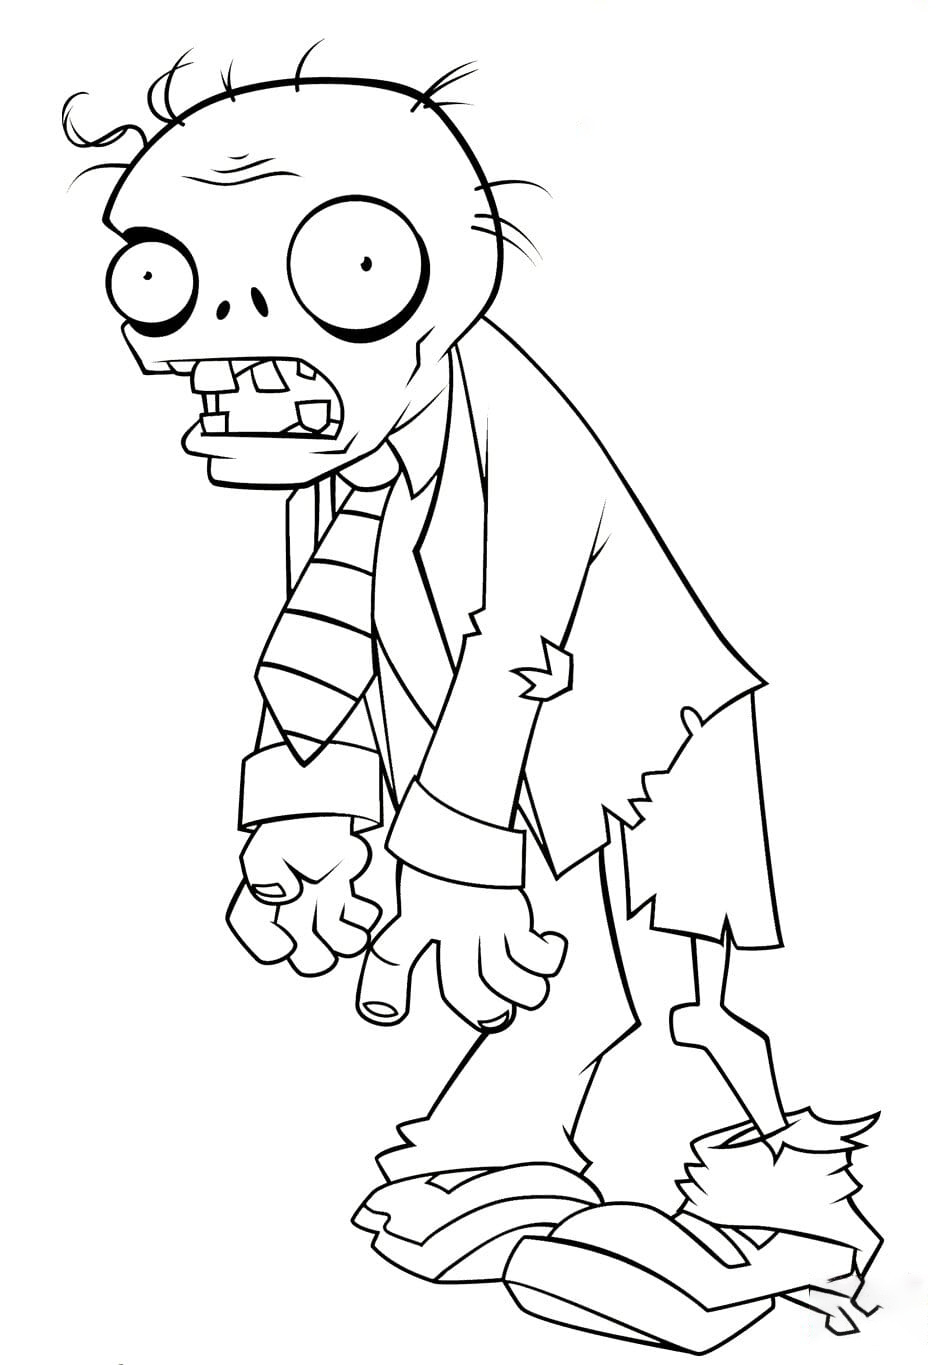 Basic Zombie Coloring Page